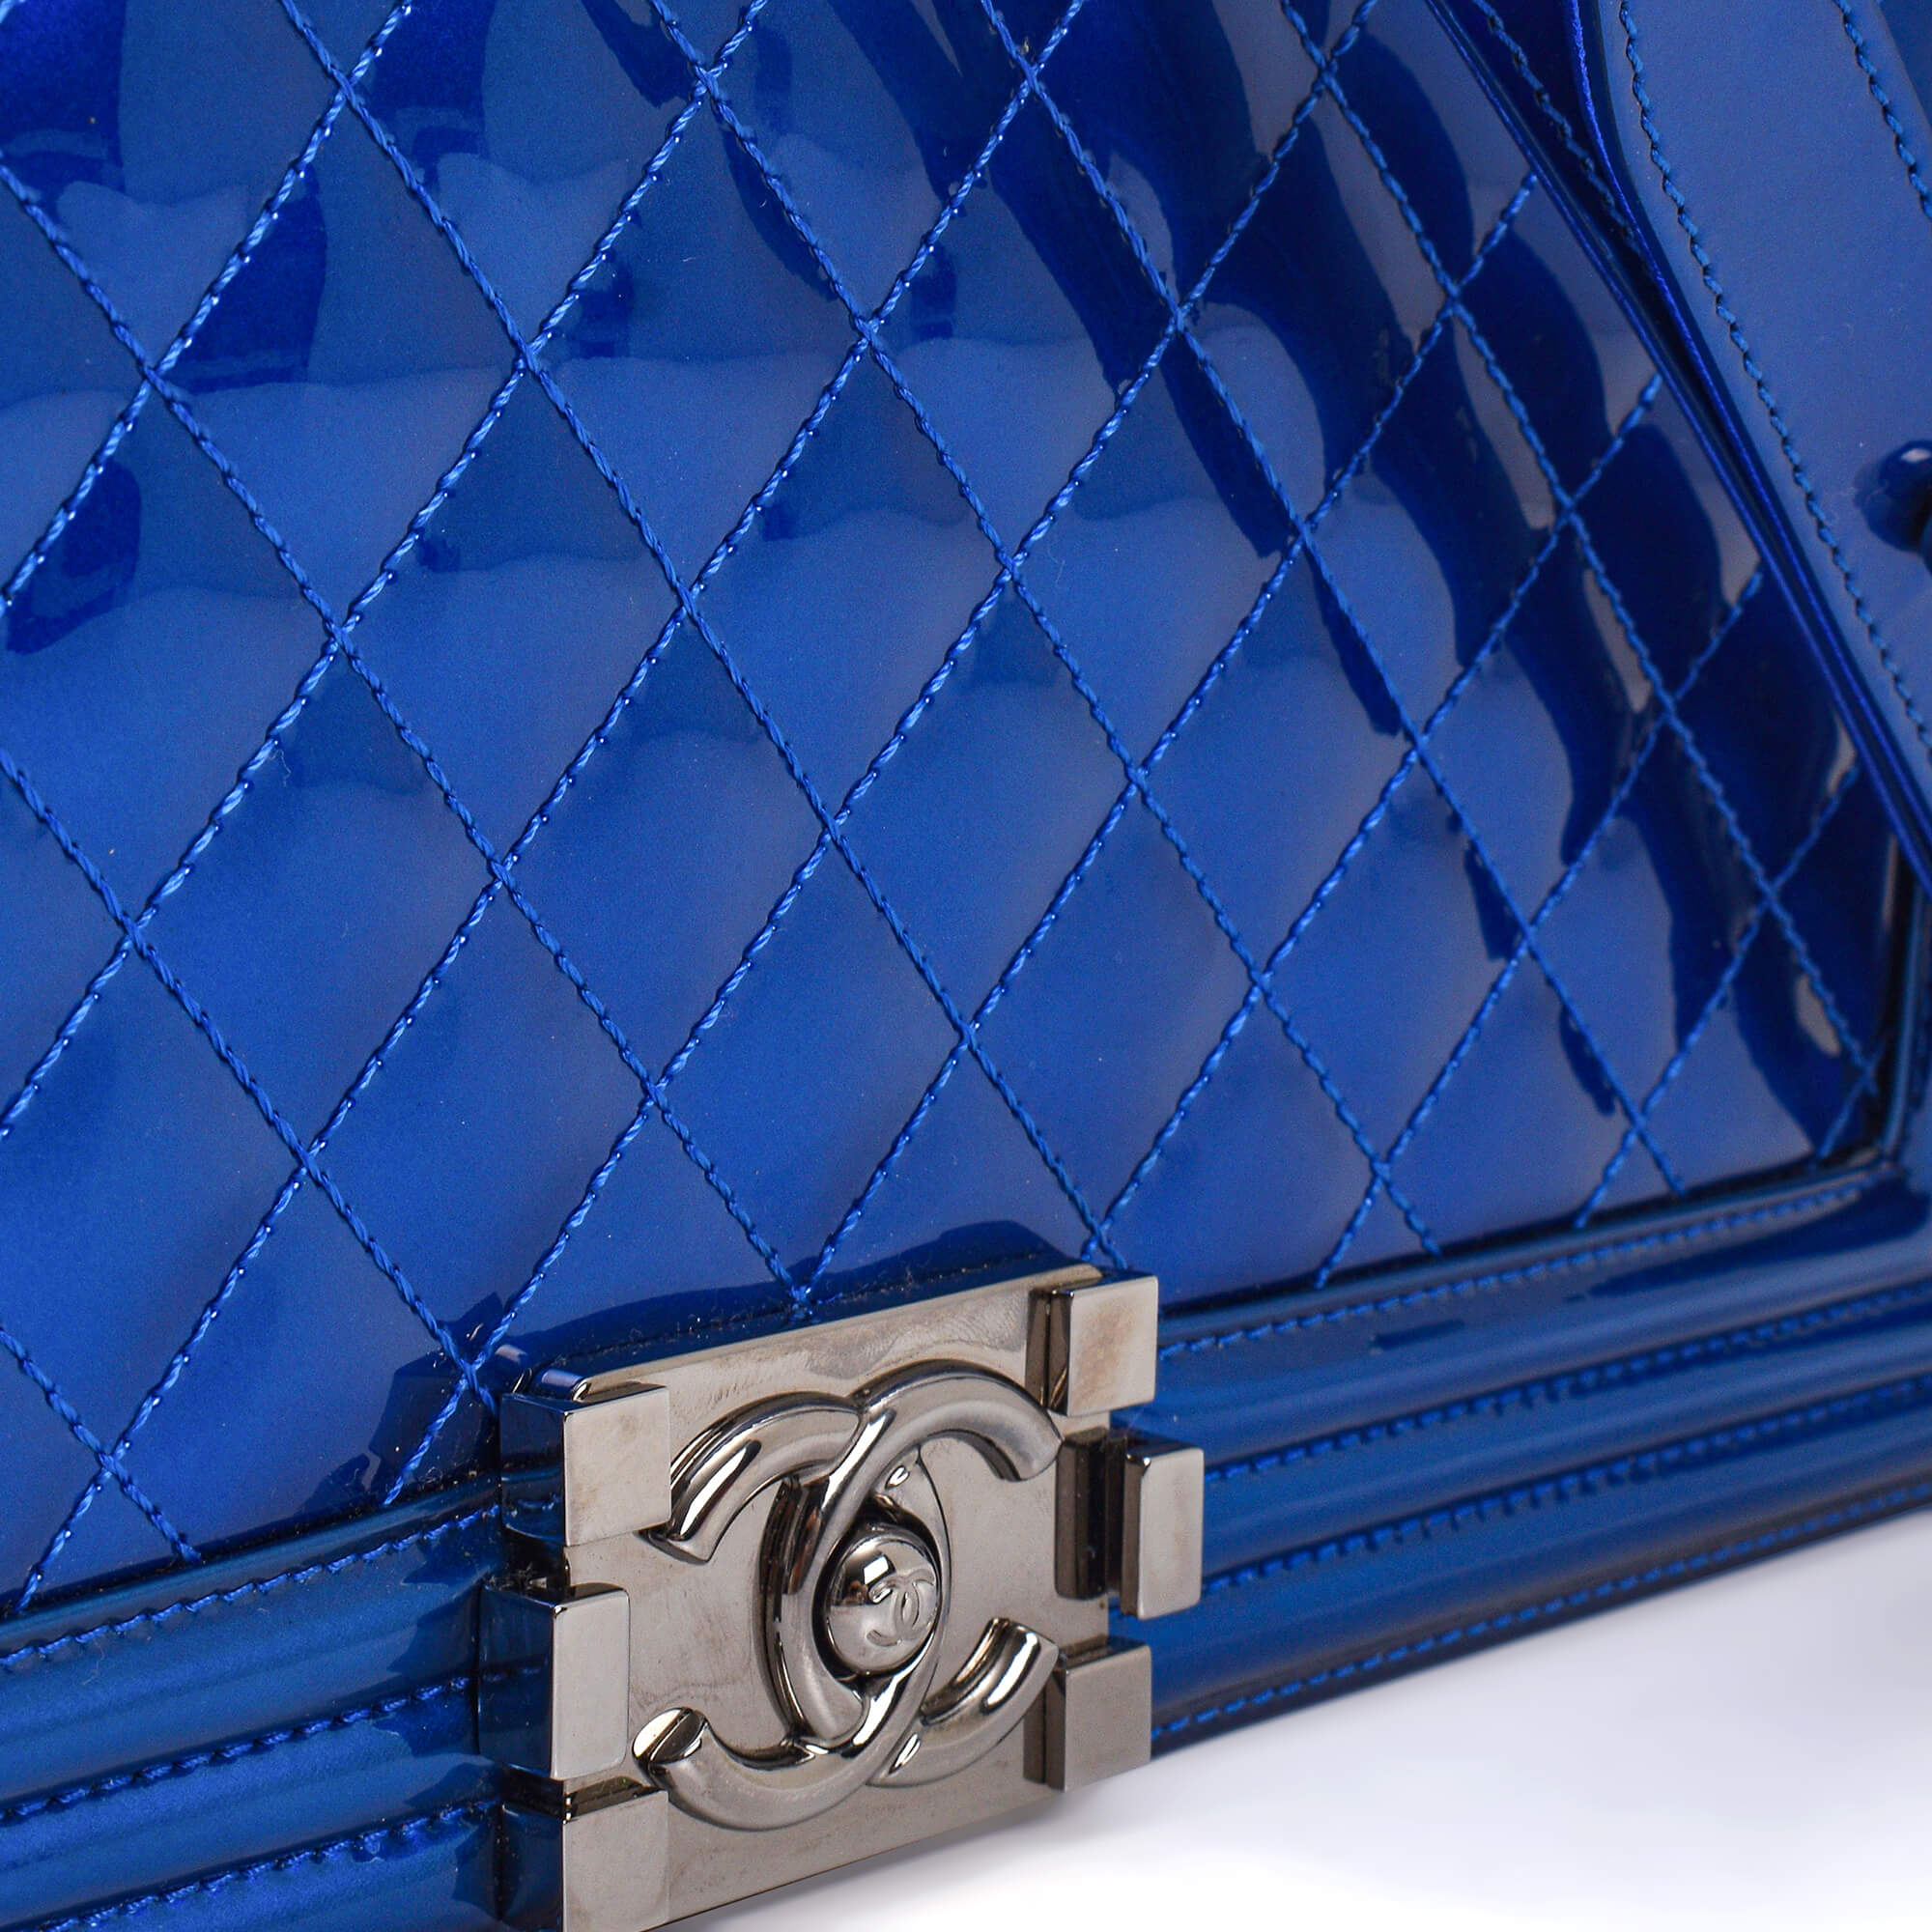 Chanel - Metallic Blue Quilted Patent Leather Medium Boy Bag